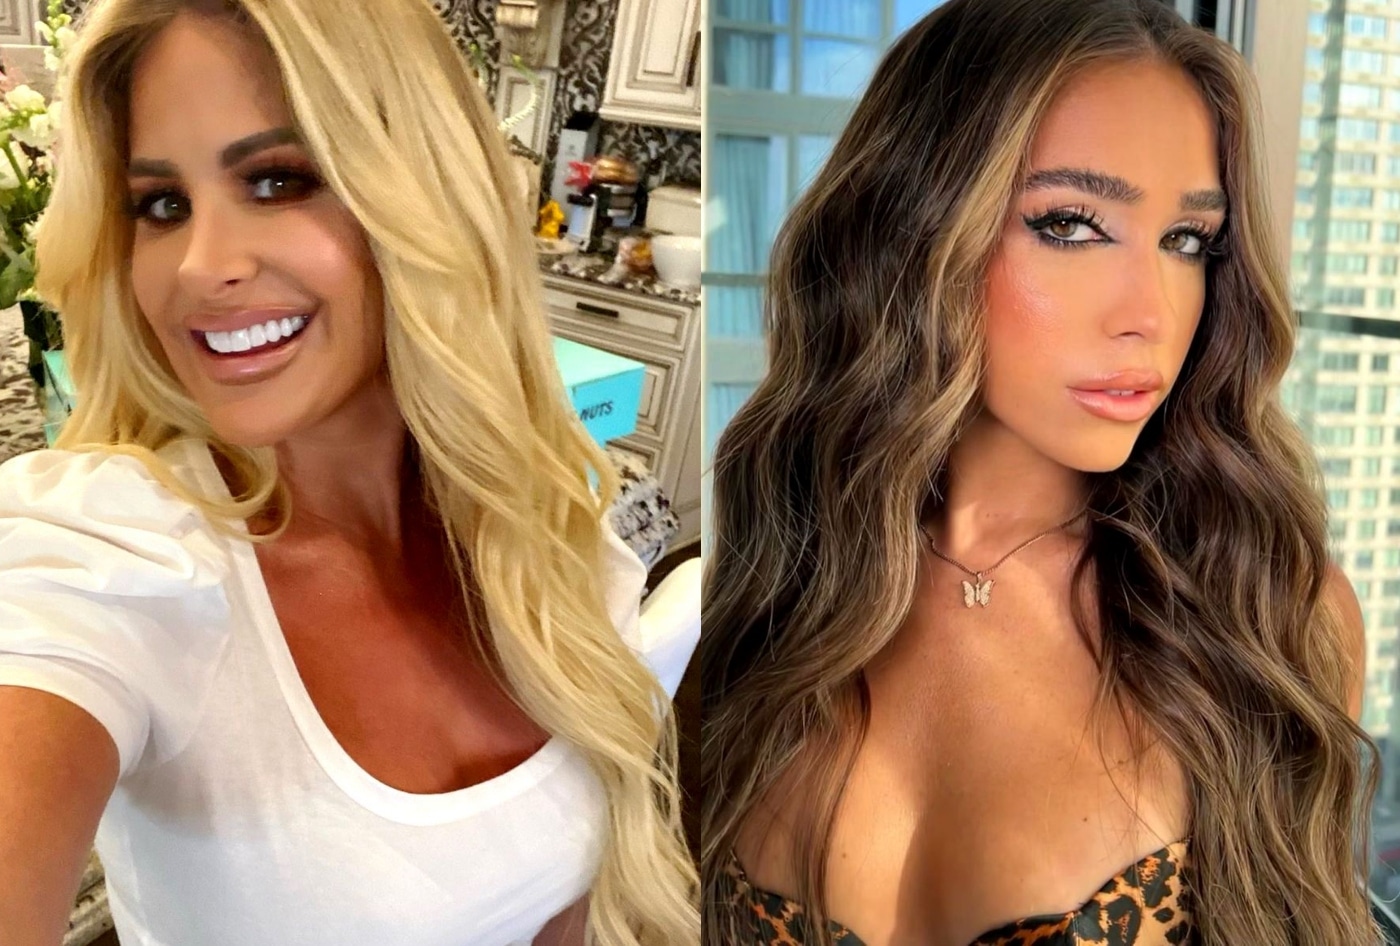 Kim Zolciak Shares Where She Stands With Daughter Ariana After Her Reaction to Controversial “RIP” Post, Plus Bank Sets New Foreclosure Date on Kim’s Home